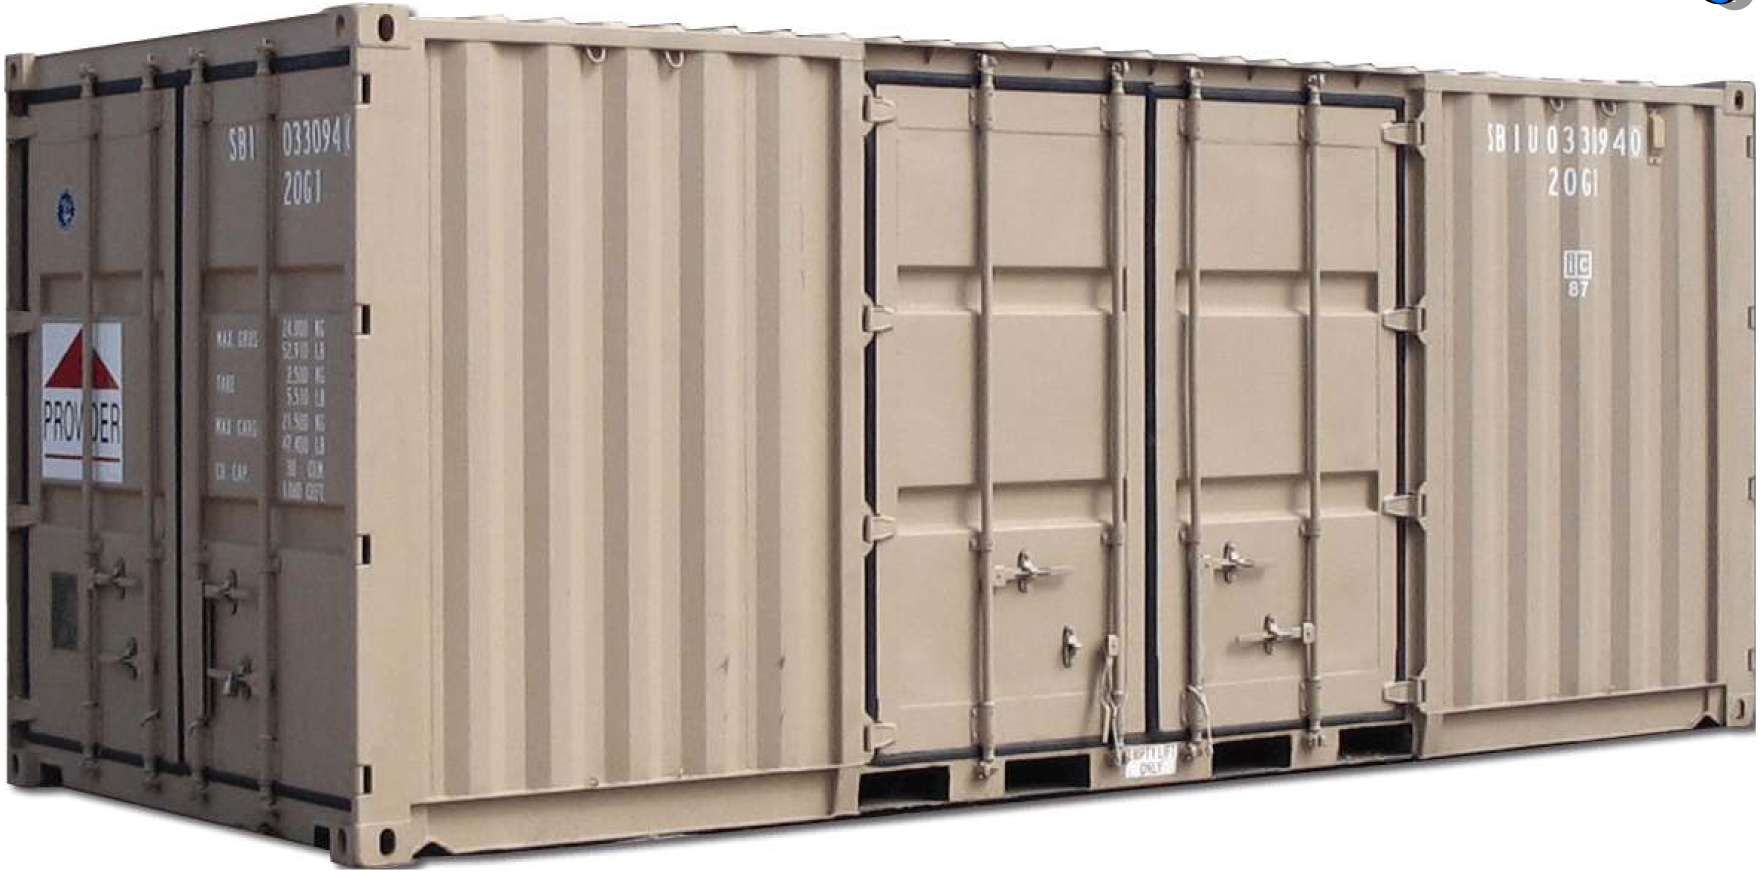 20’ x 8’ ISO Container Workshop